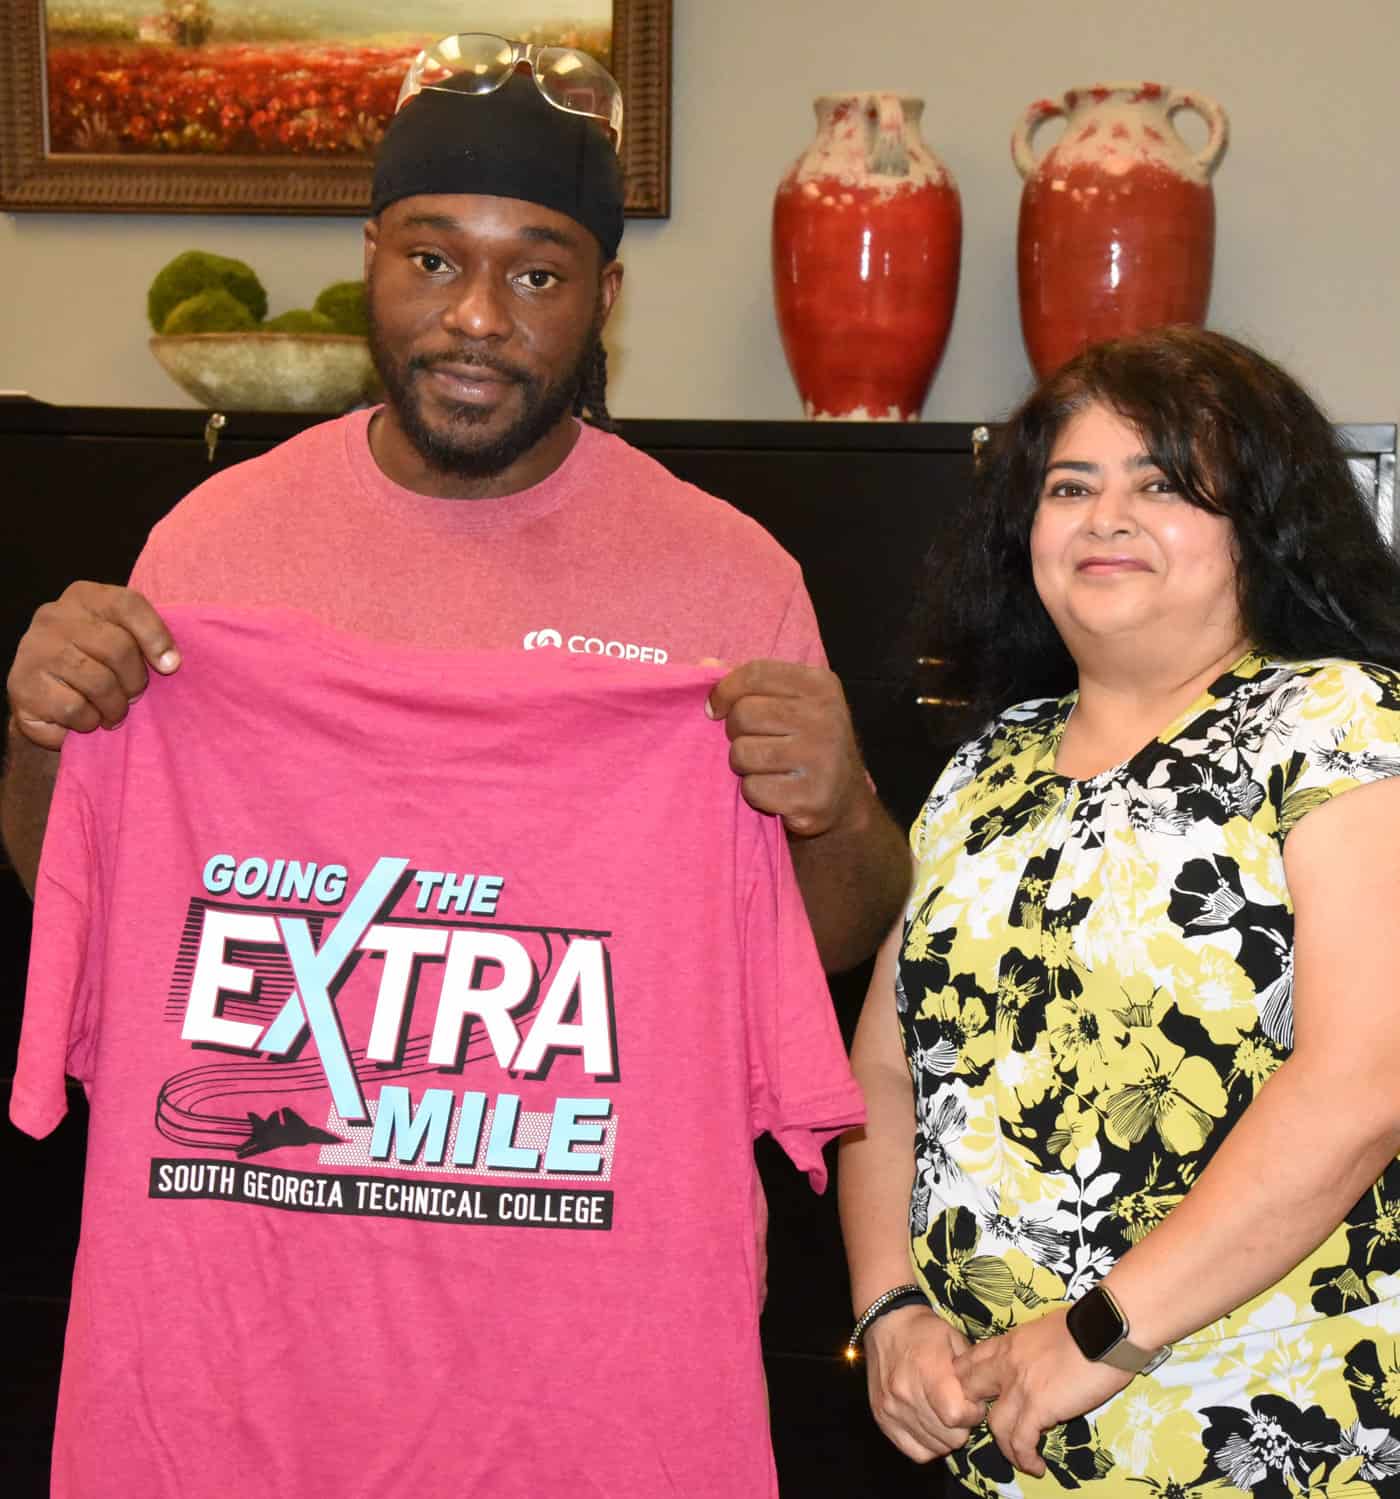 Shown above with Trinity Snelling is SGTC WIOA Coordinator Sandhya Muljibhai presenting him with a “Going the Extra Mile” t-shirt from South Georgia Technical College.